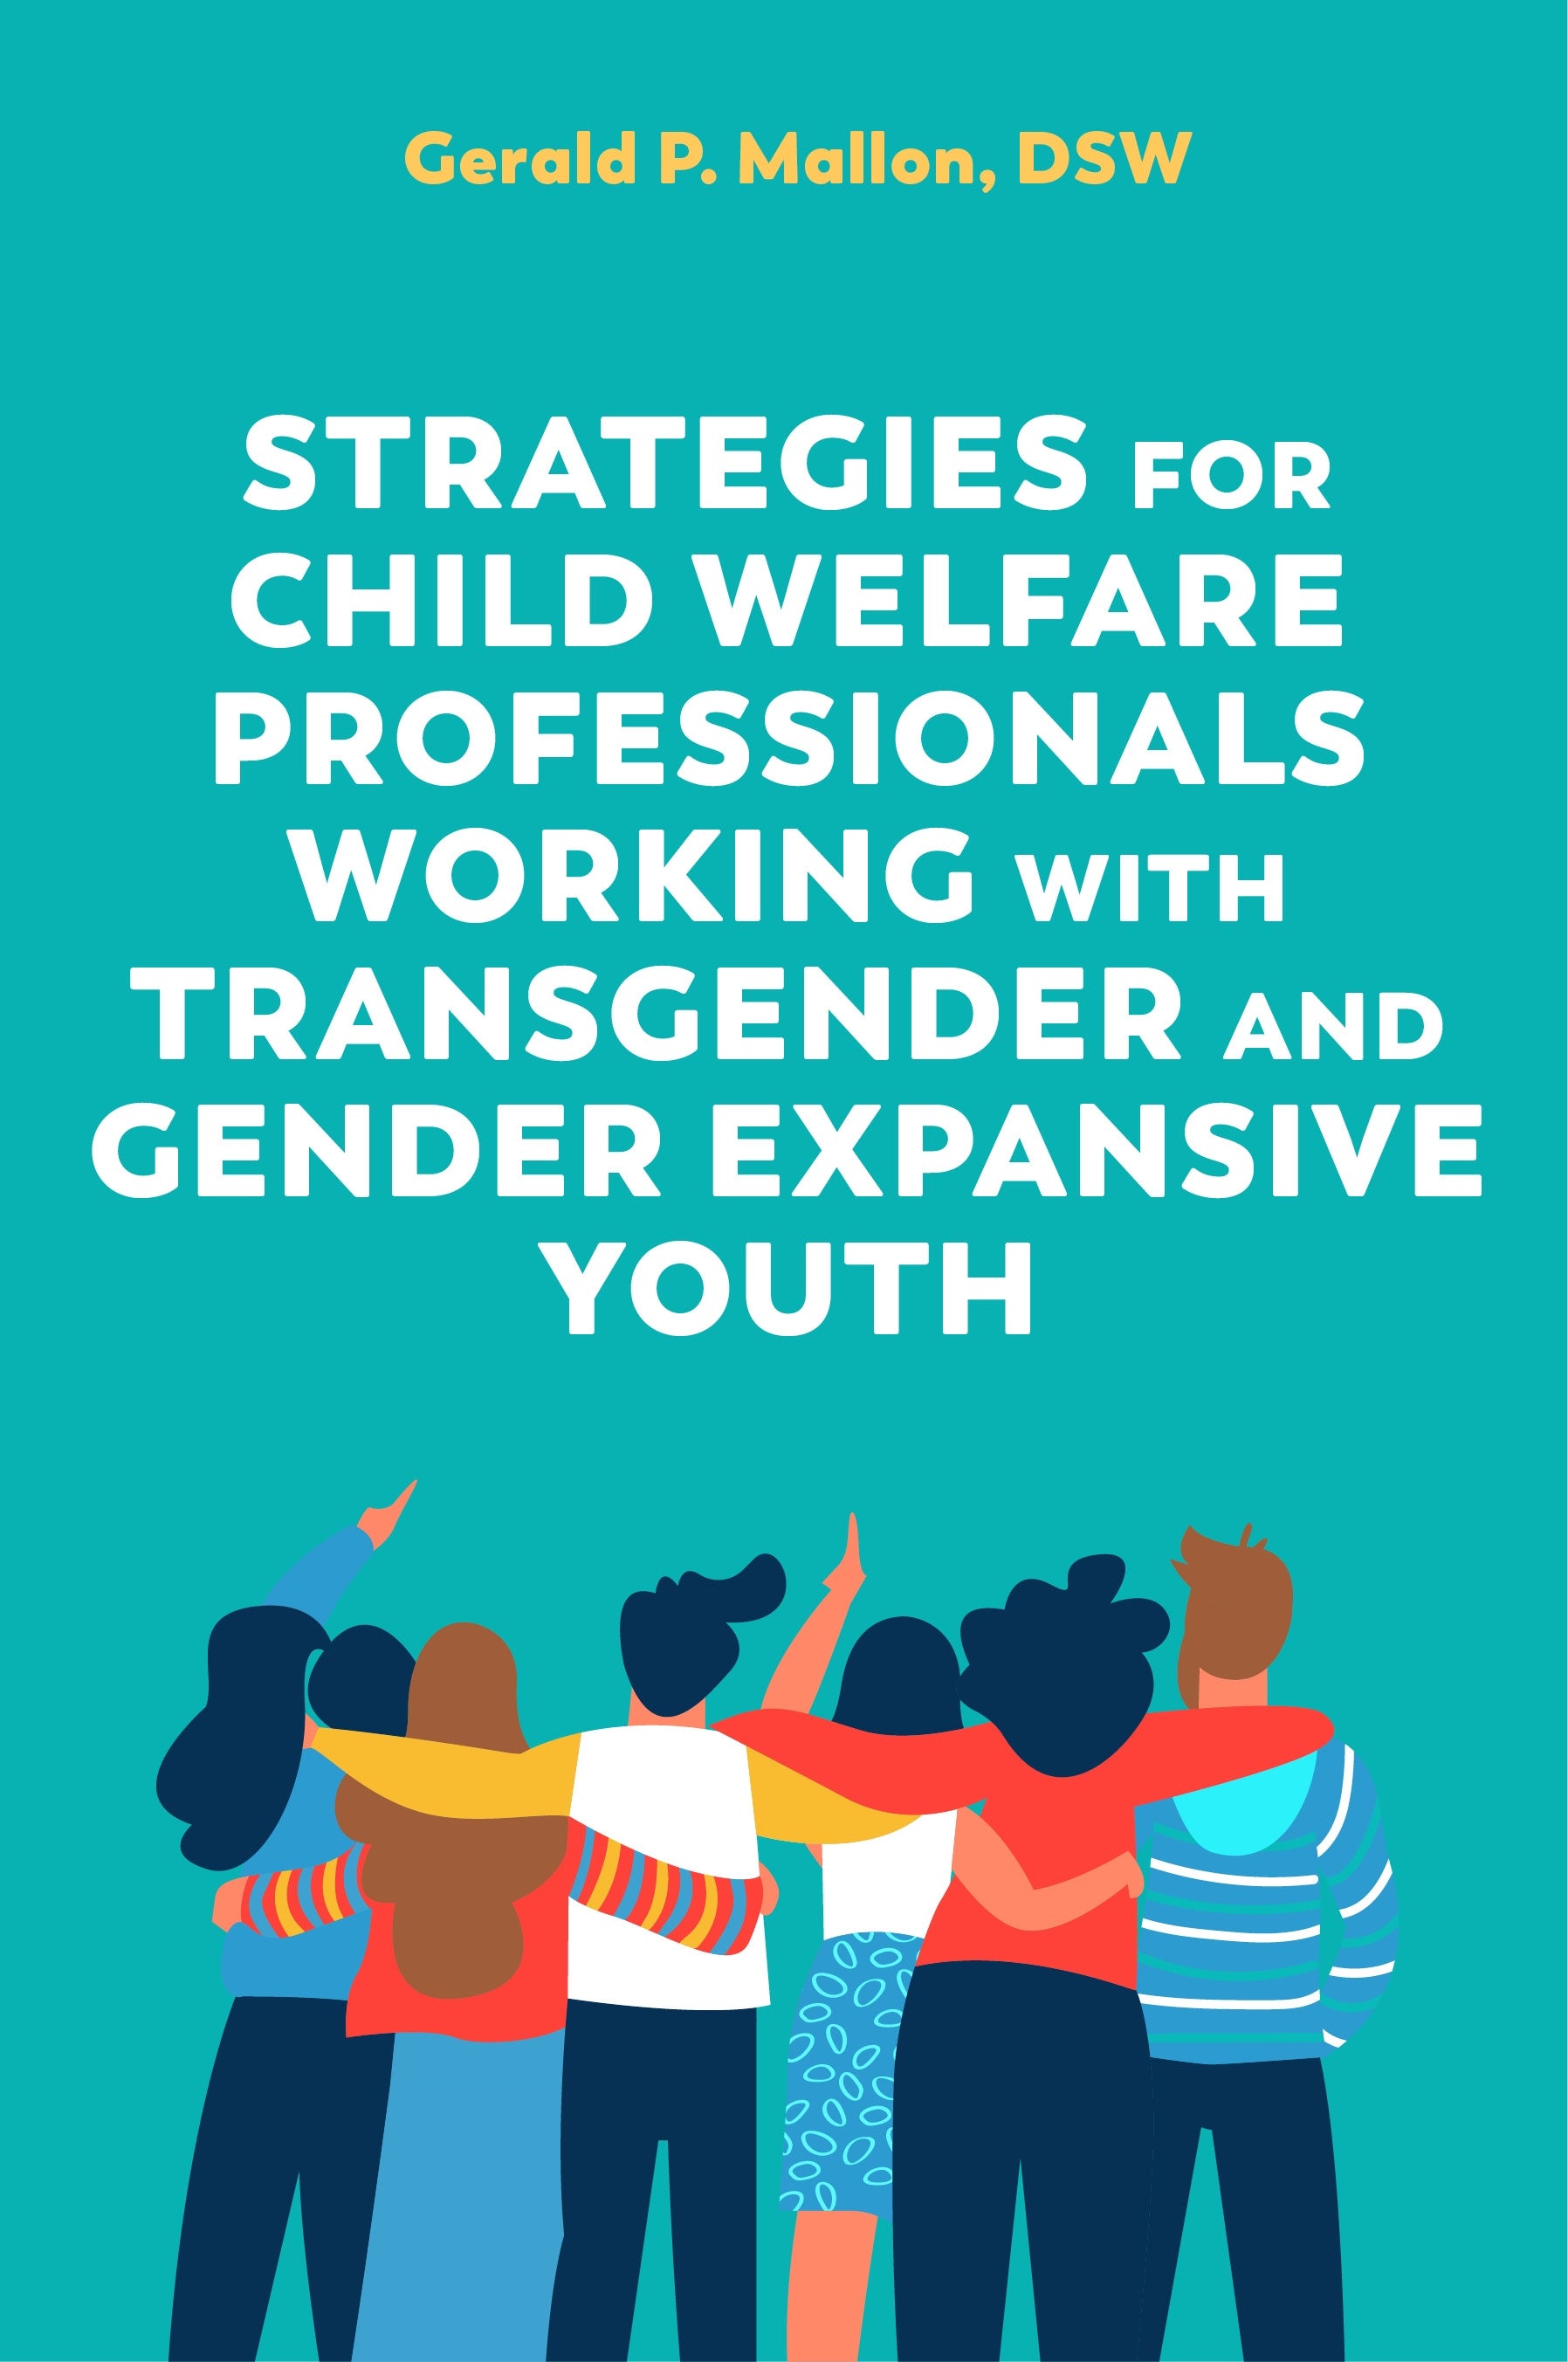 Strategies for Child Welfare Professionals Working with Transgender and Gender Expansive Youth by Gerald Mallon